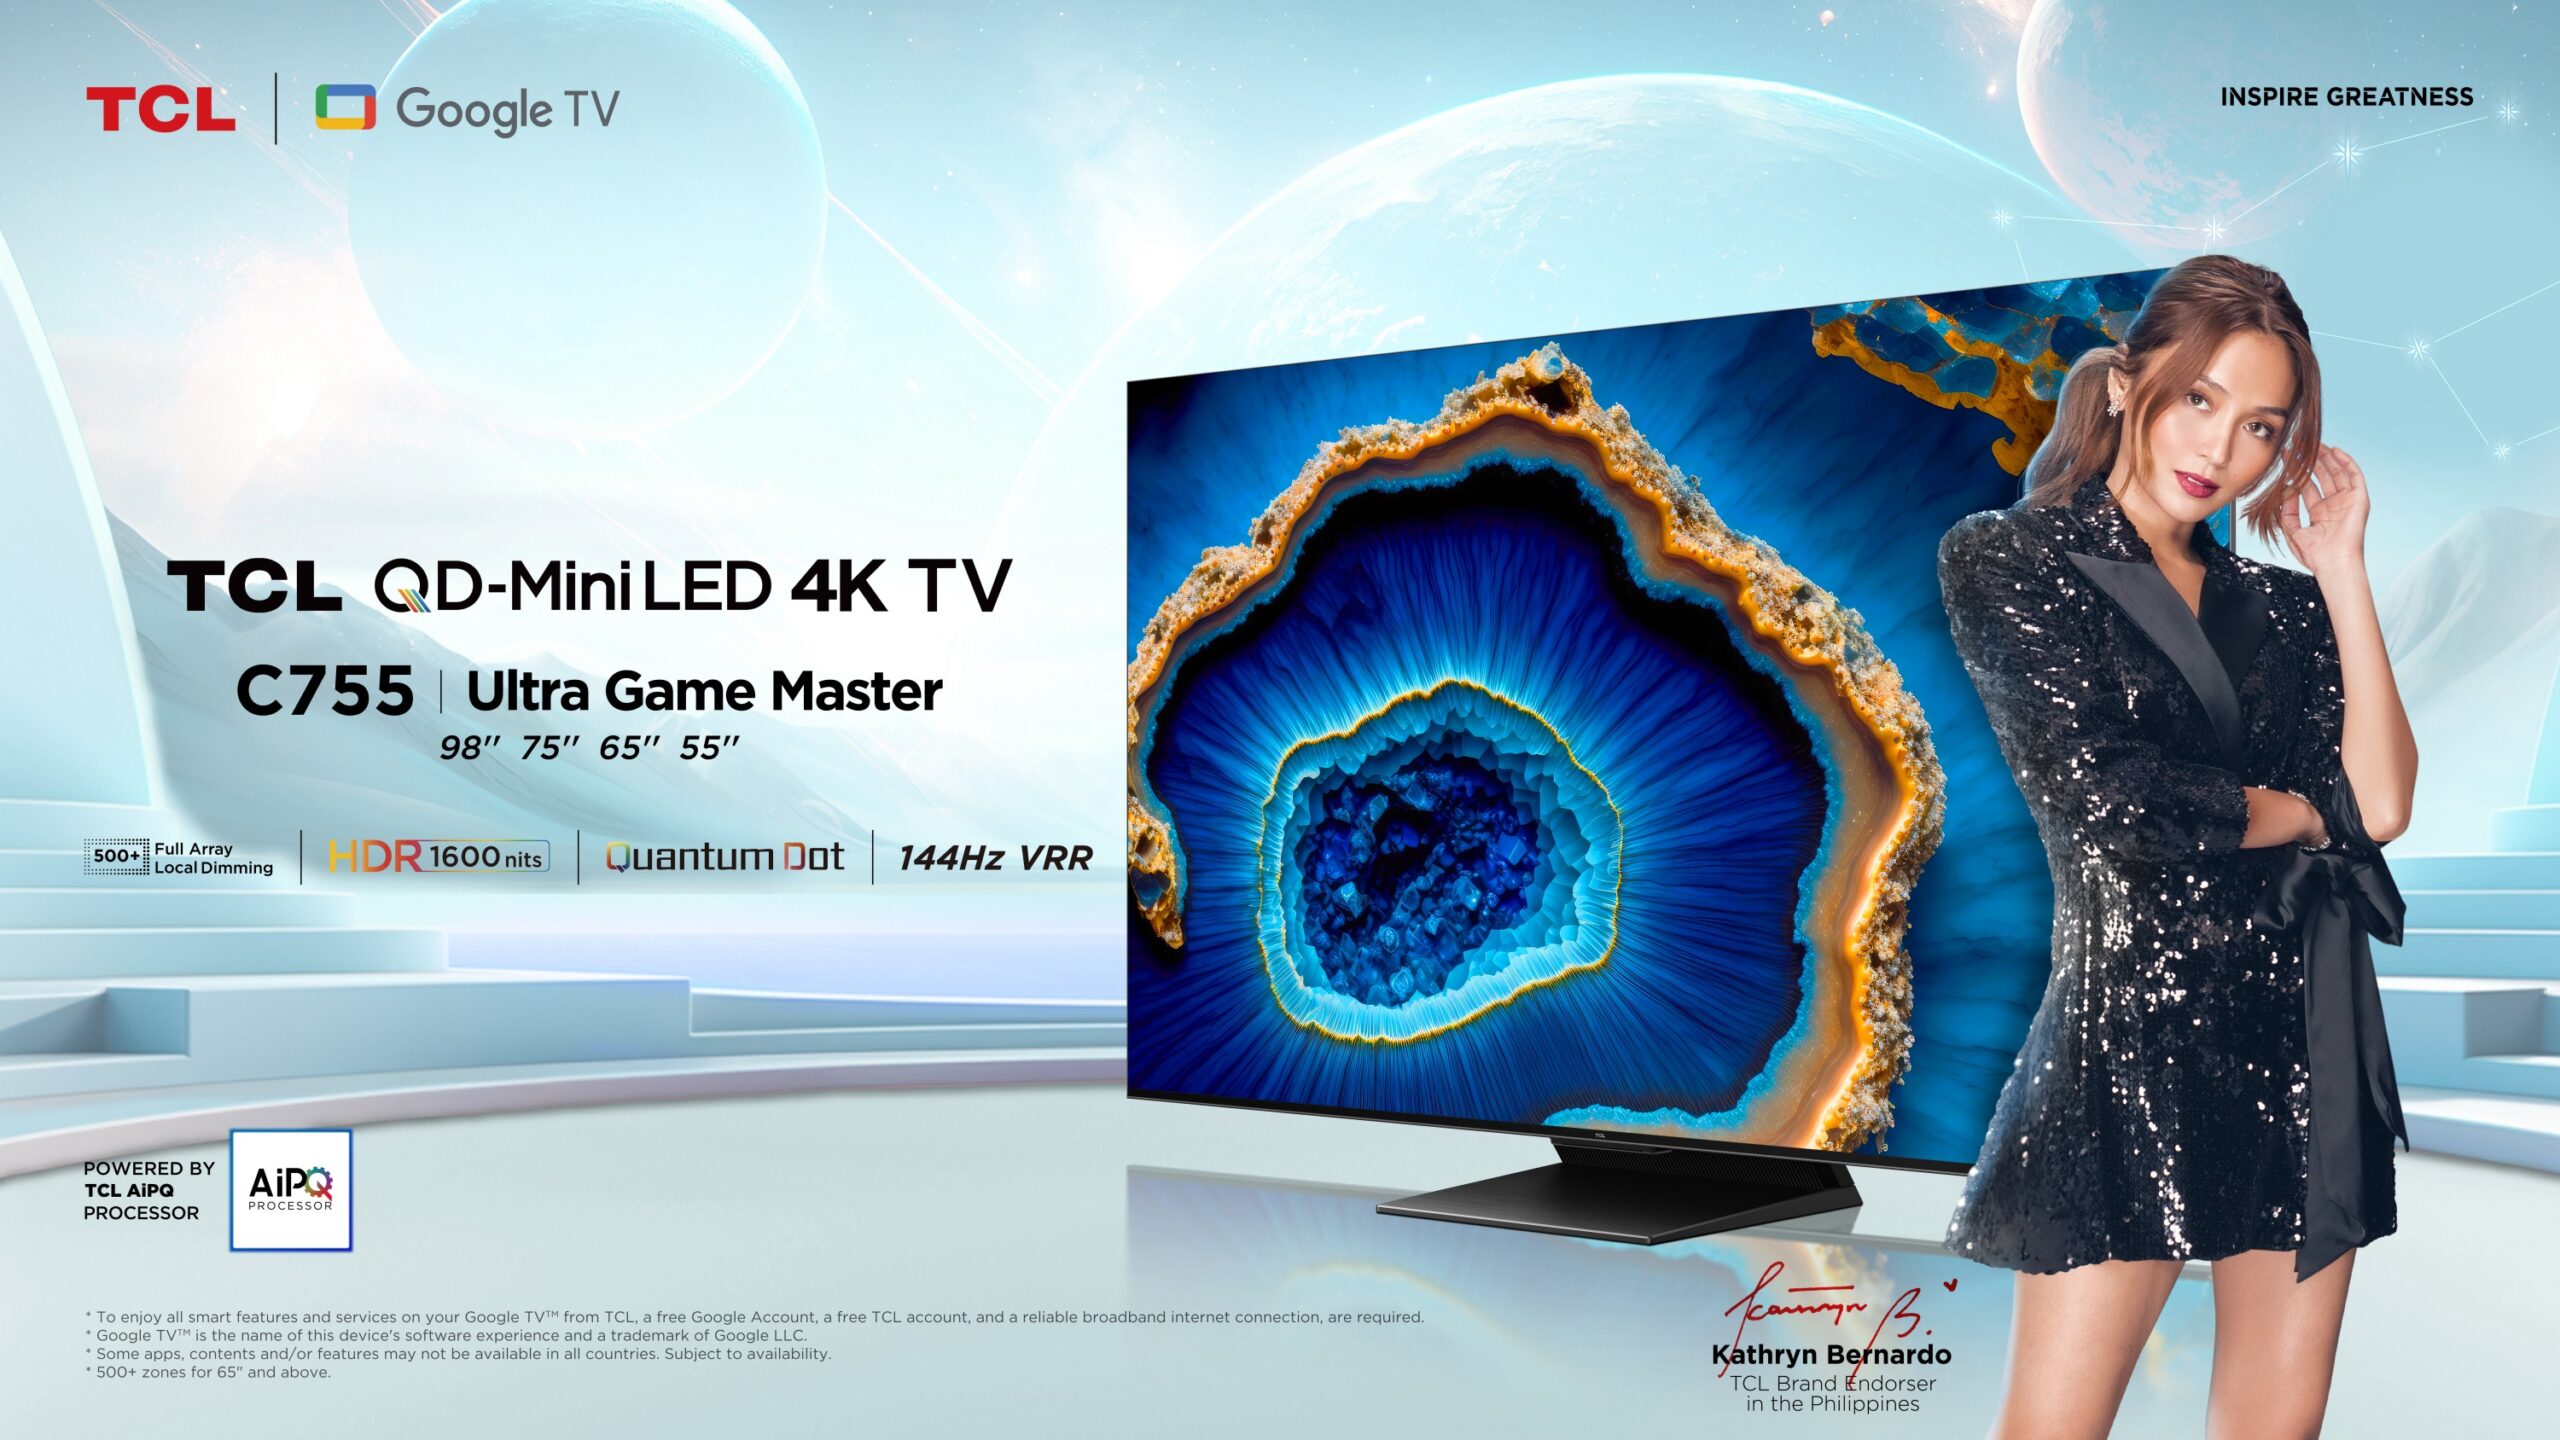 TCL introduces the Future of Gaming with the C755 &#8216;Ultra Game Master&#8217; QD-Mini LED TV